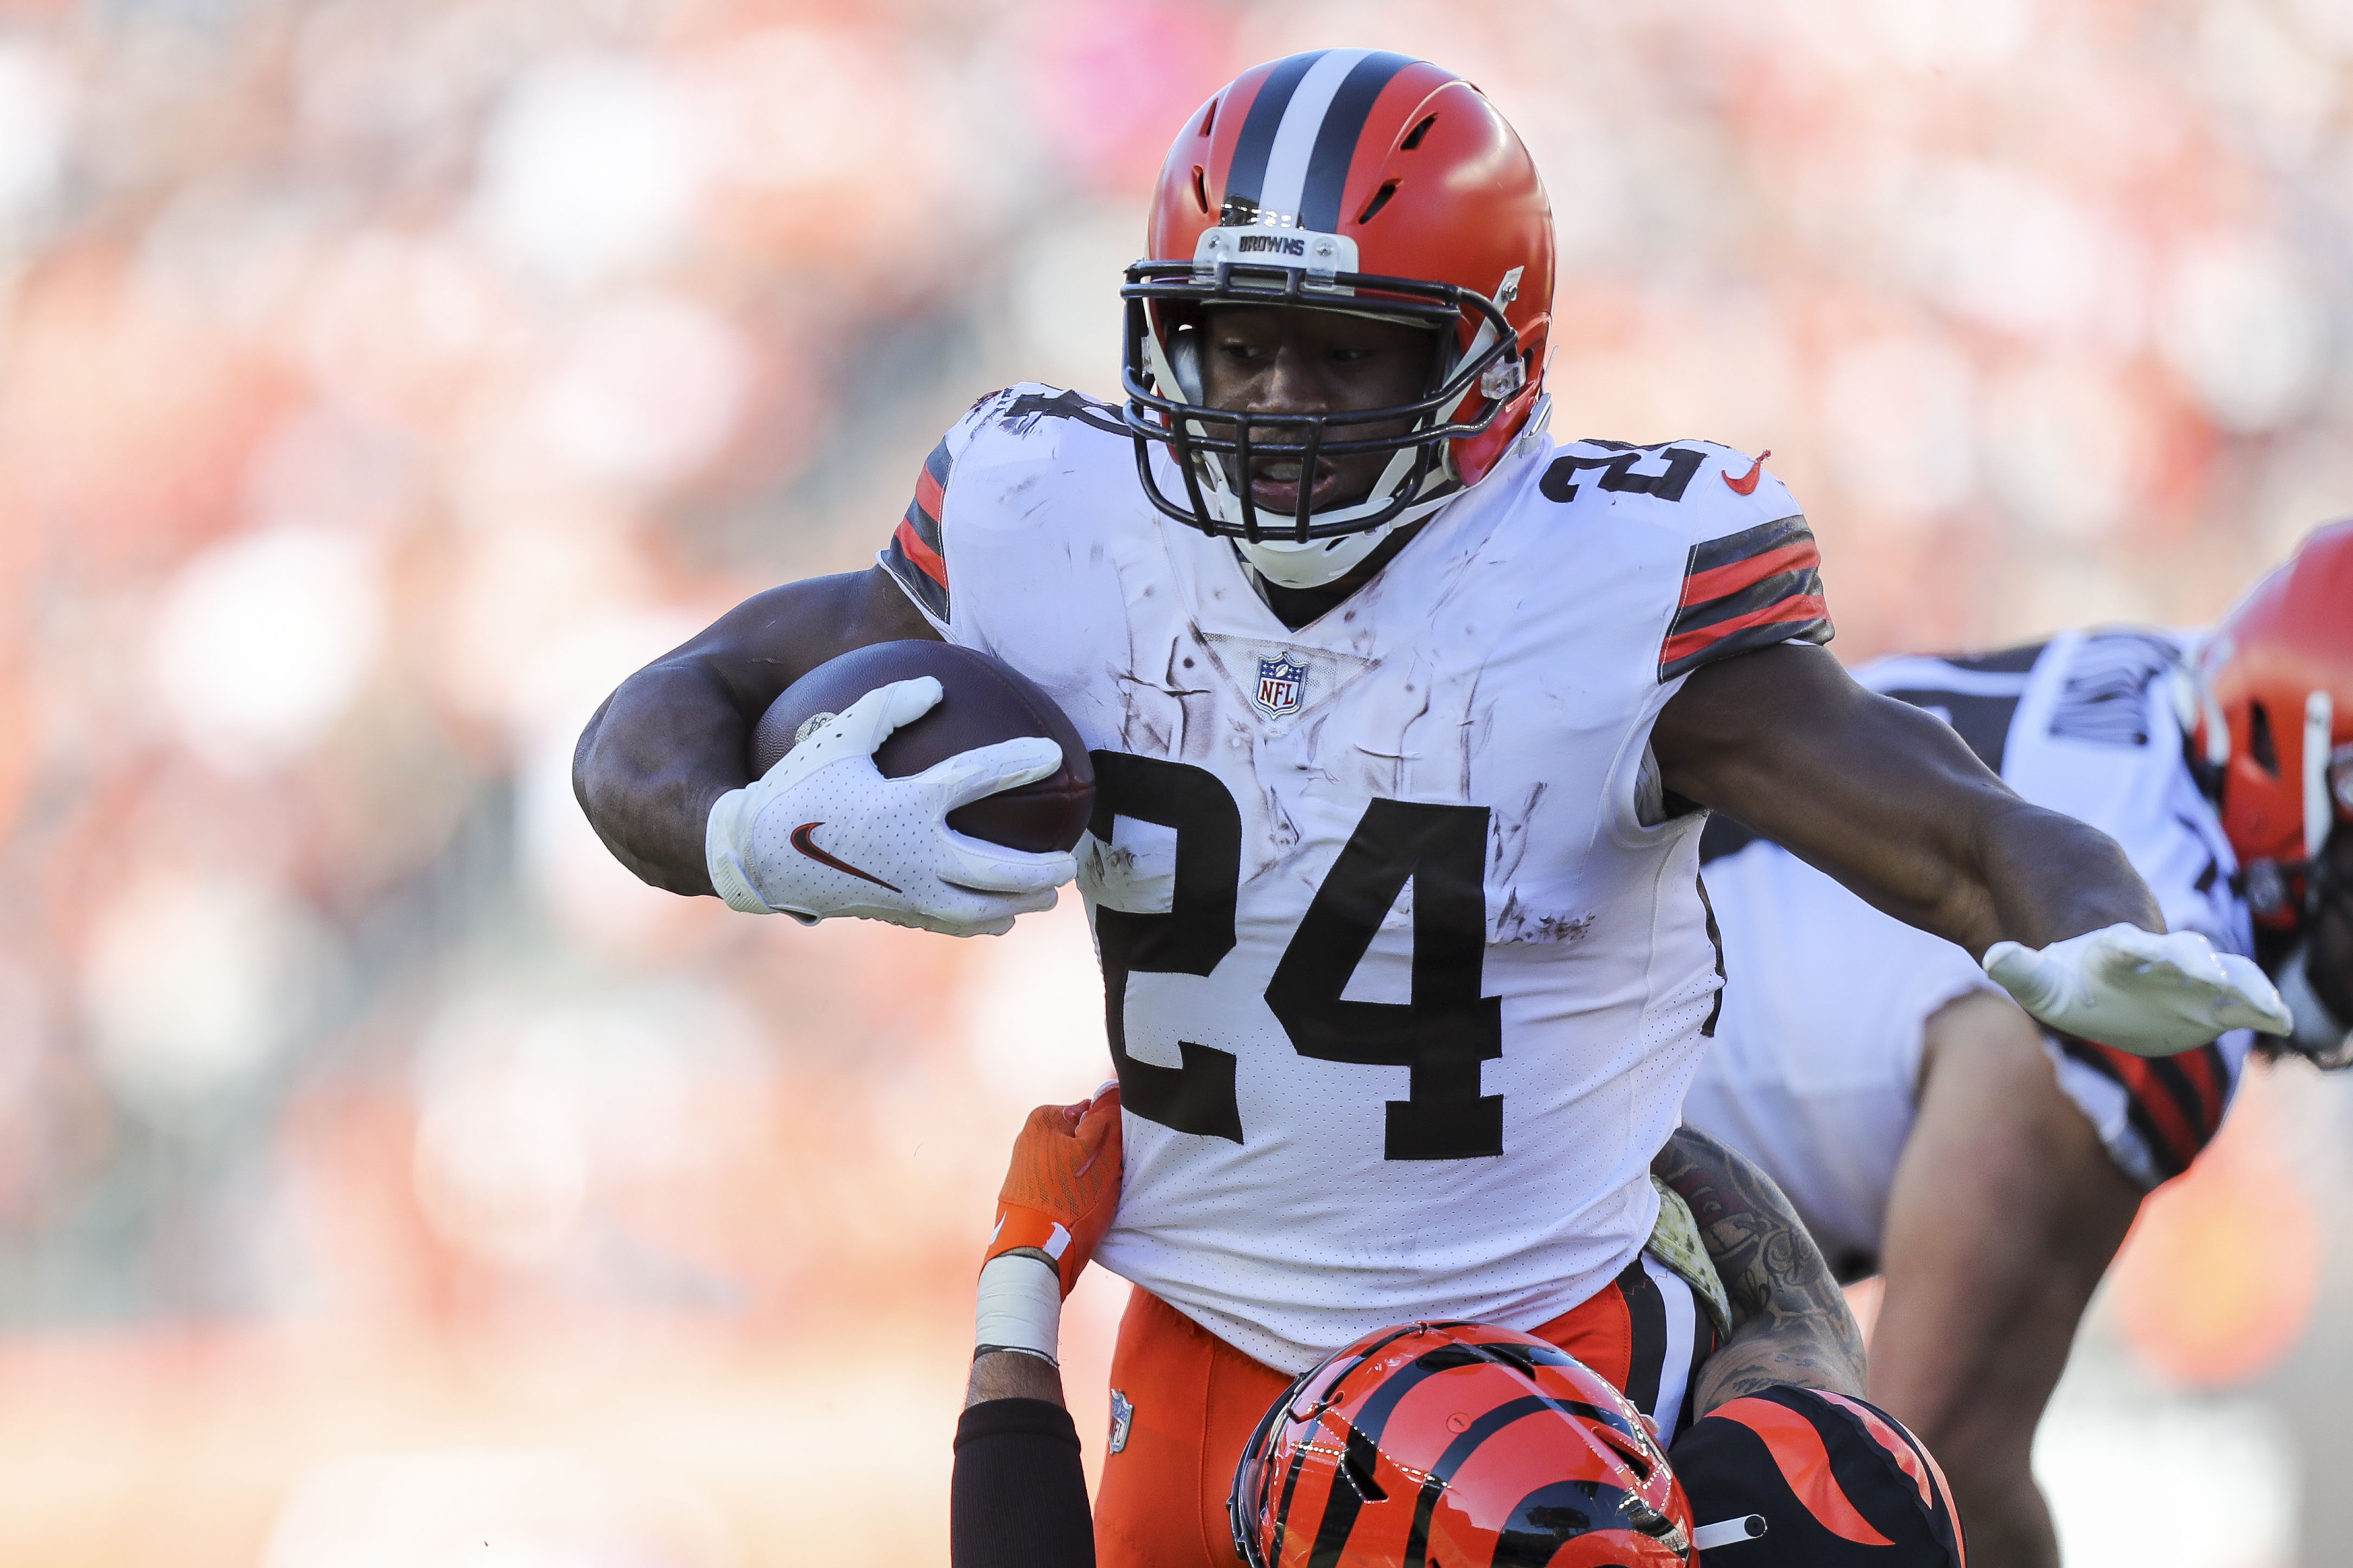 Nick Chubb & Browns Run Game will Test Green Bay Packers Defense